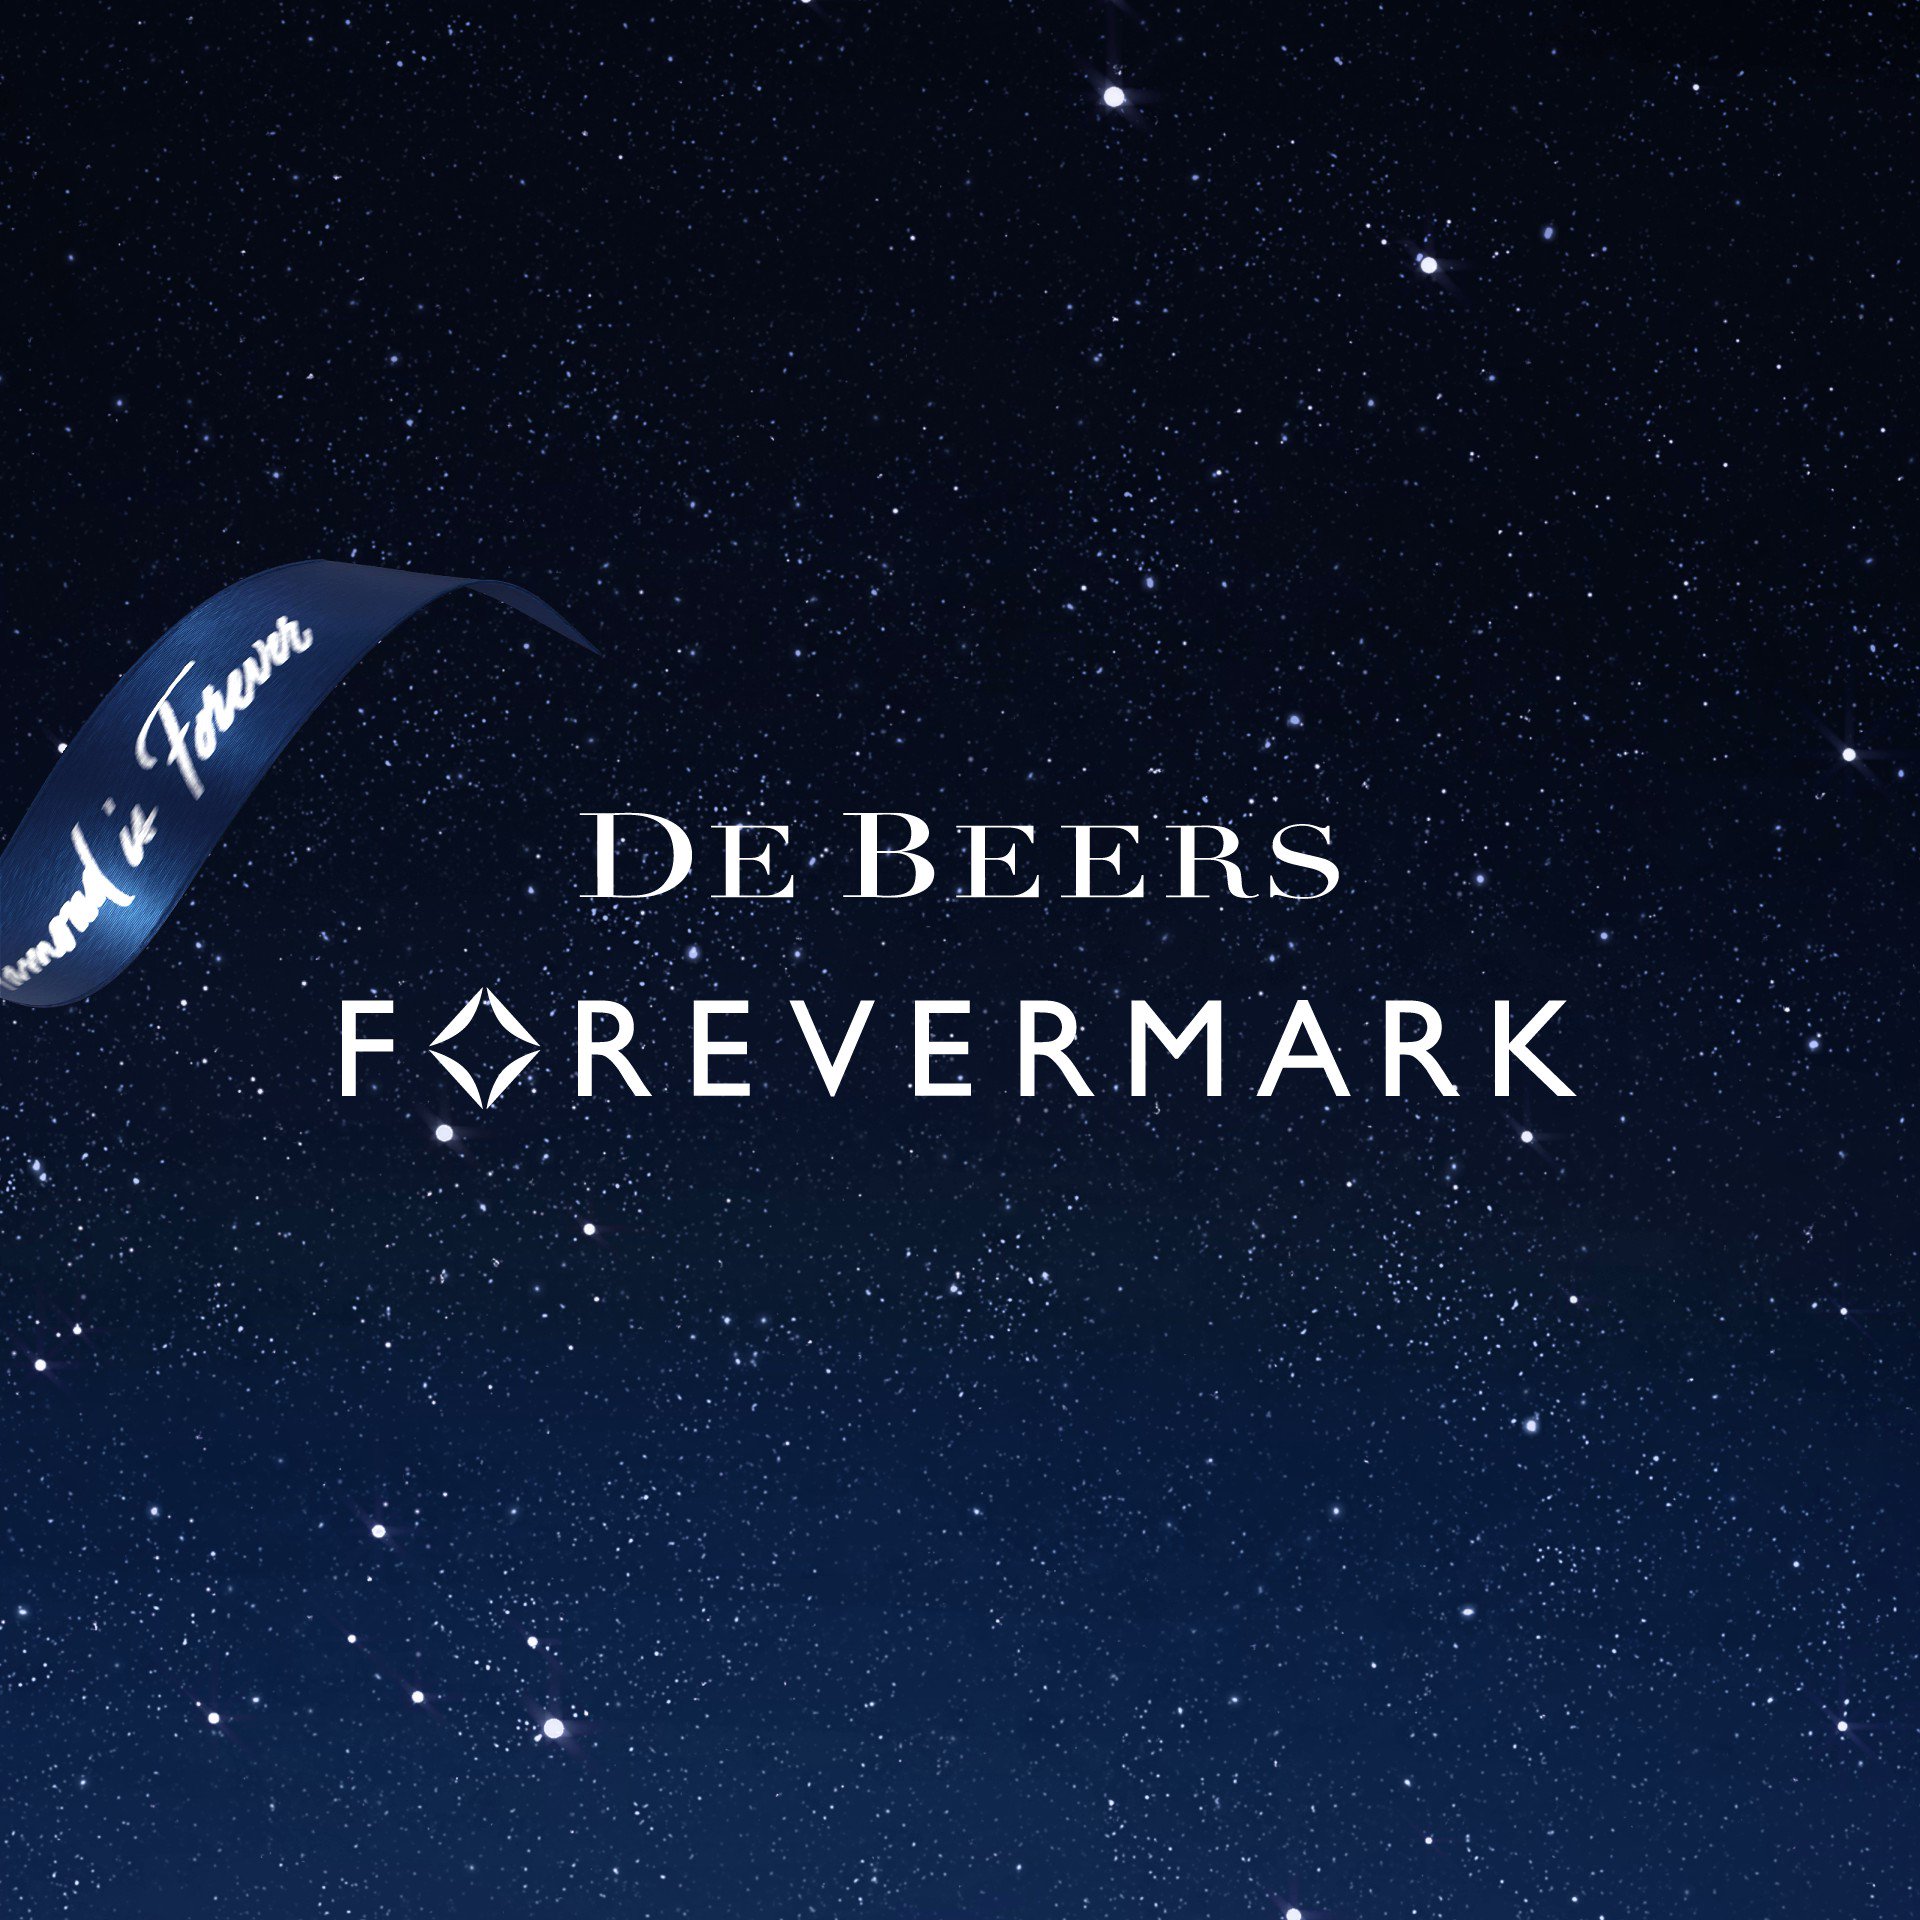 De Beers Forevermark on X: Celebrate the people who make up your